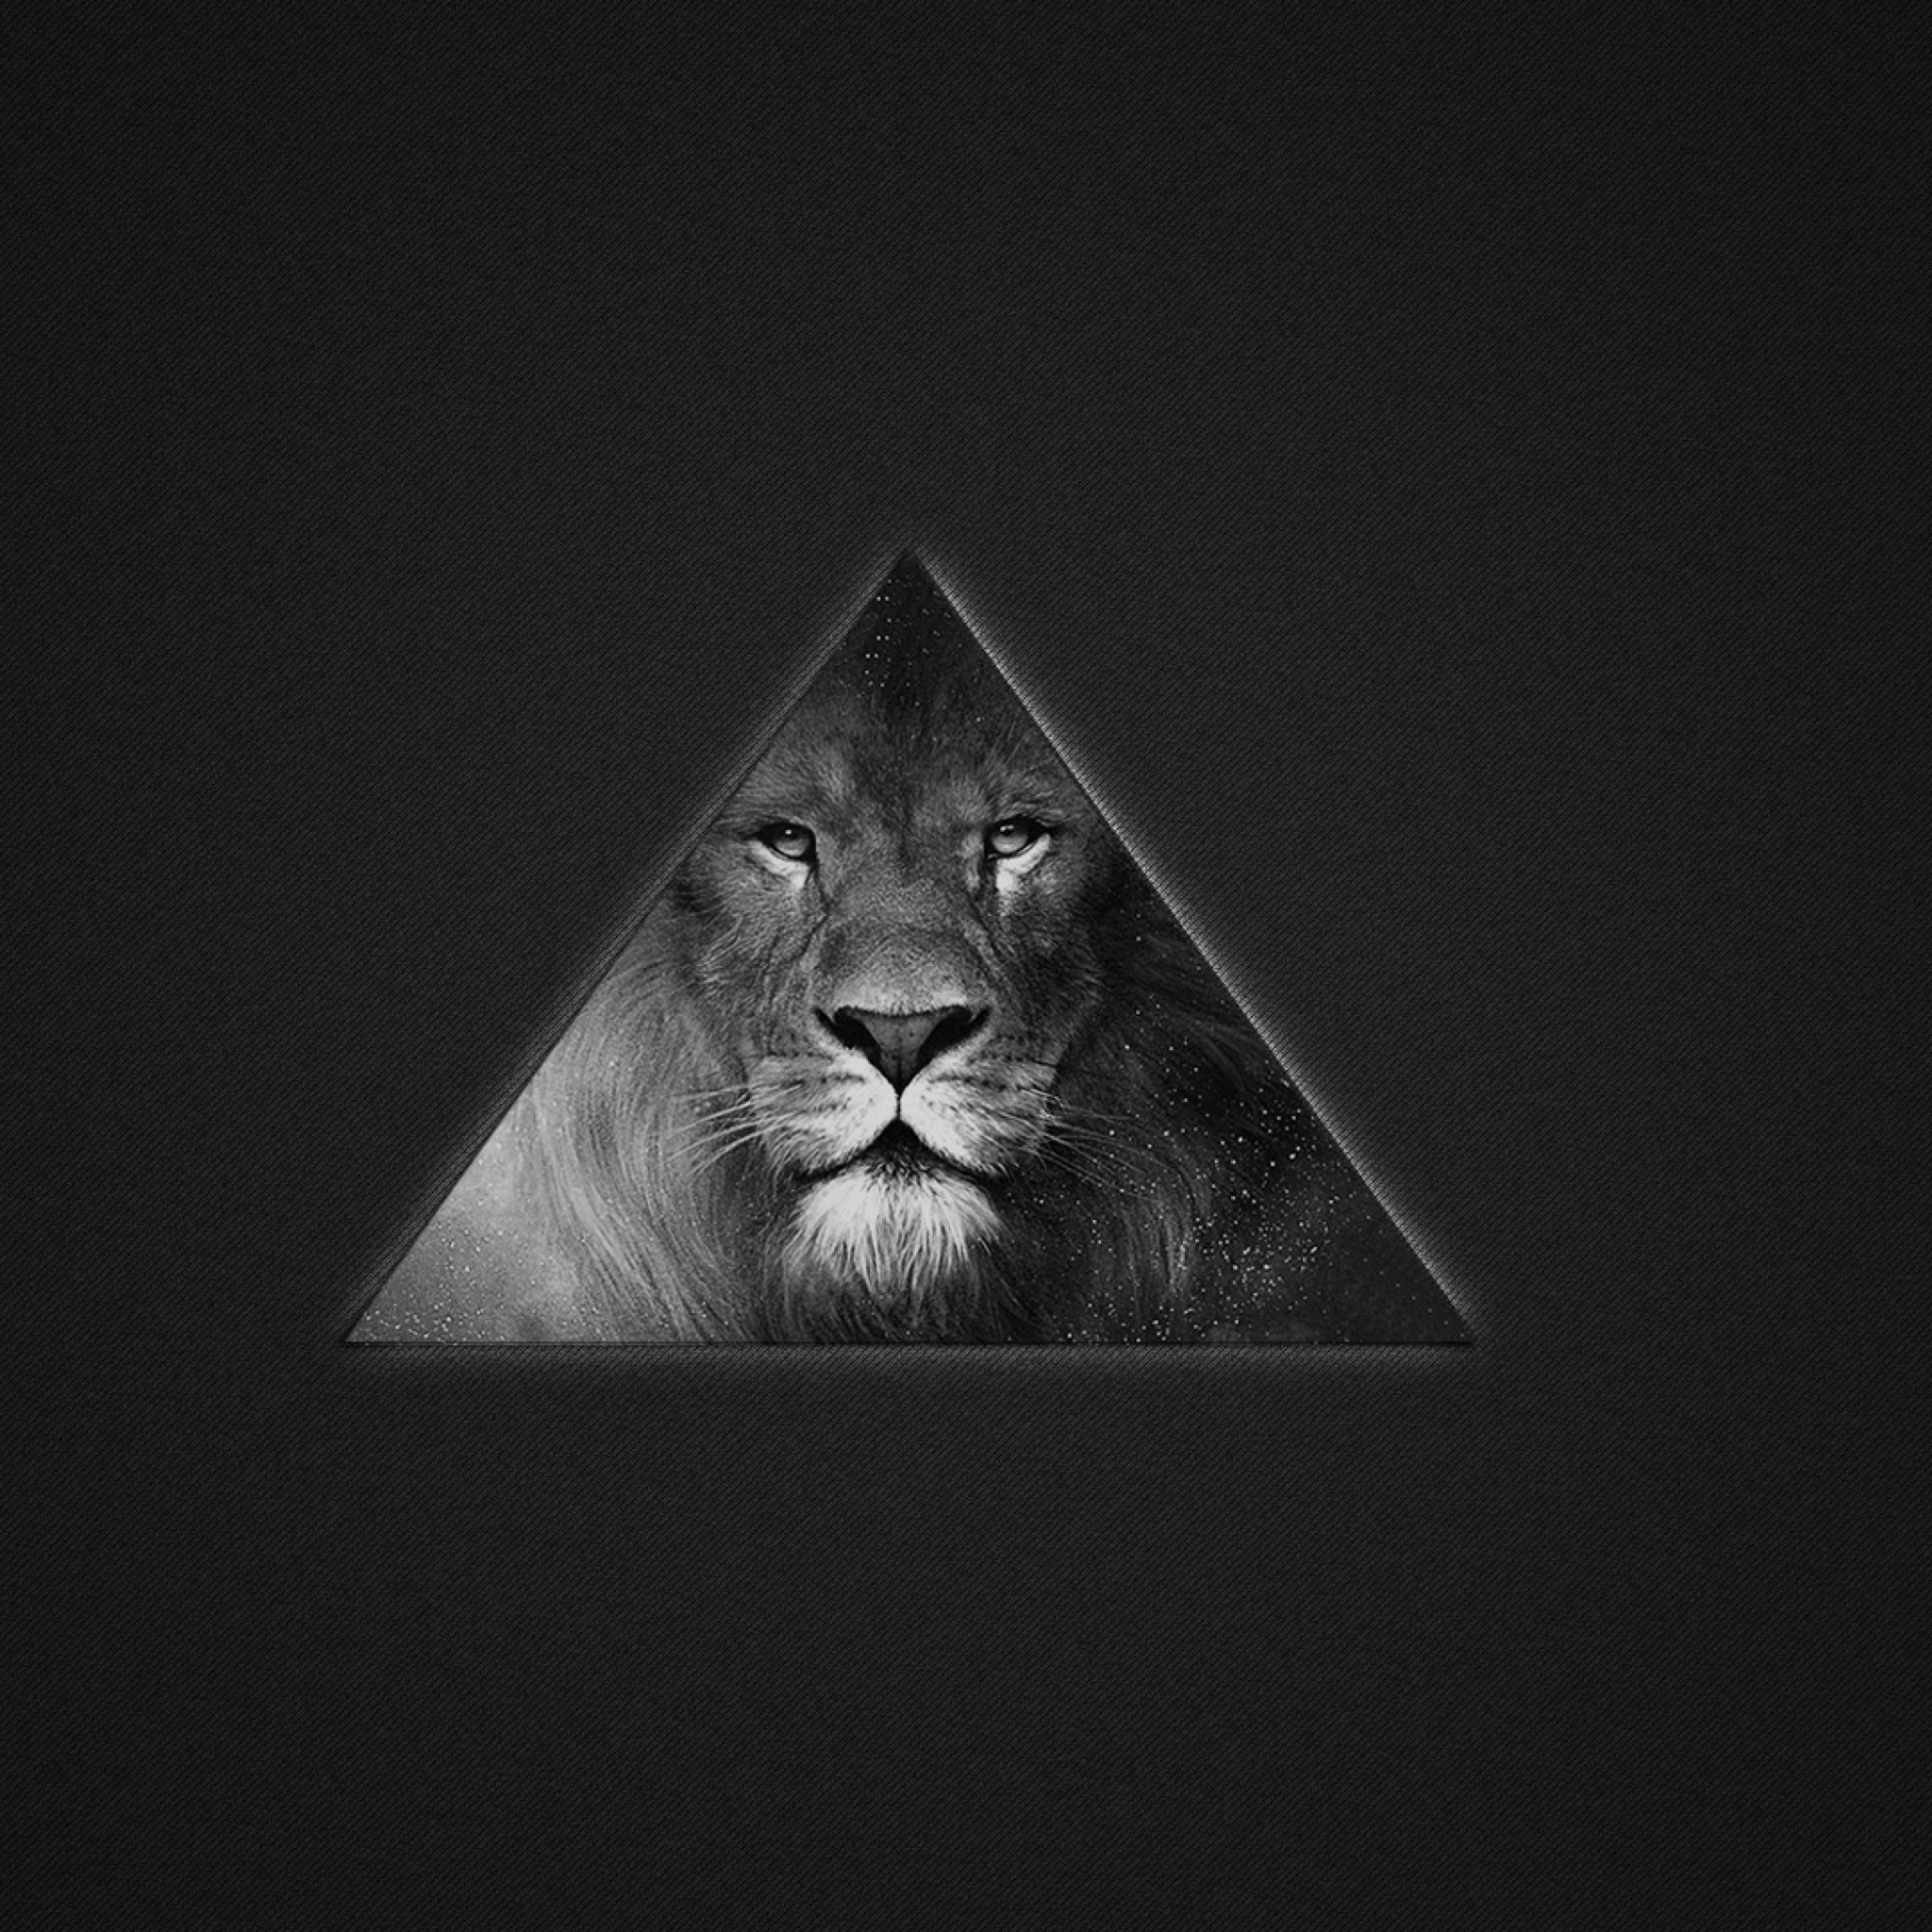 Lion's Black And White Triangle wallpaper 2048x2048